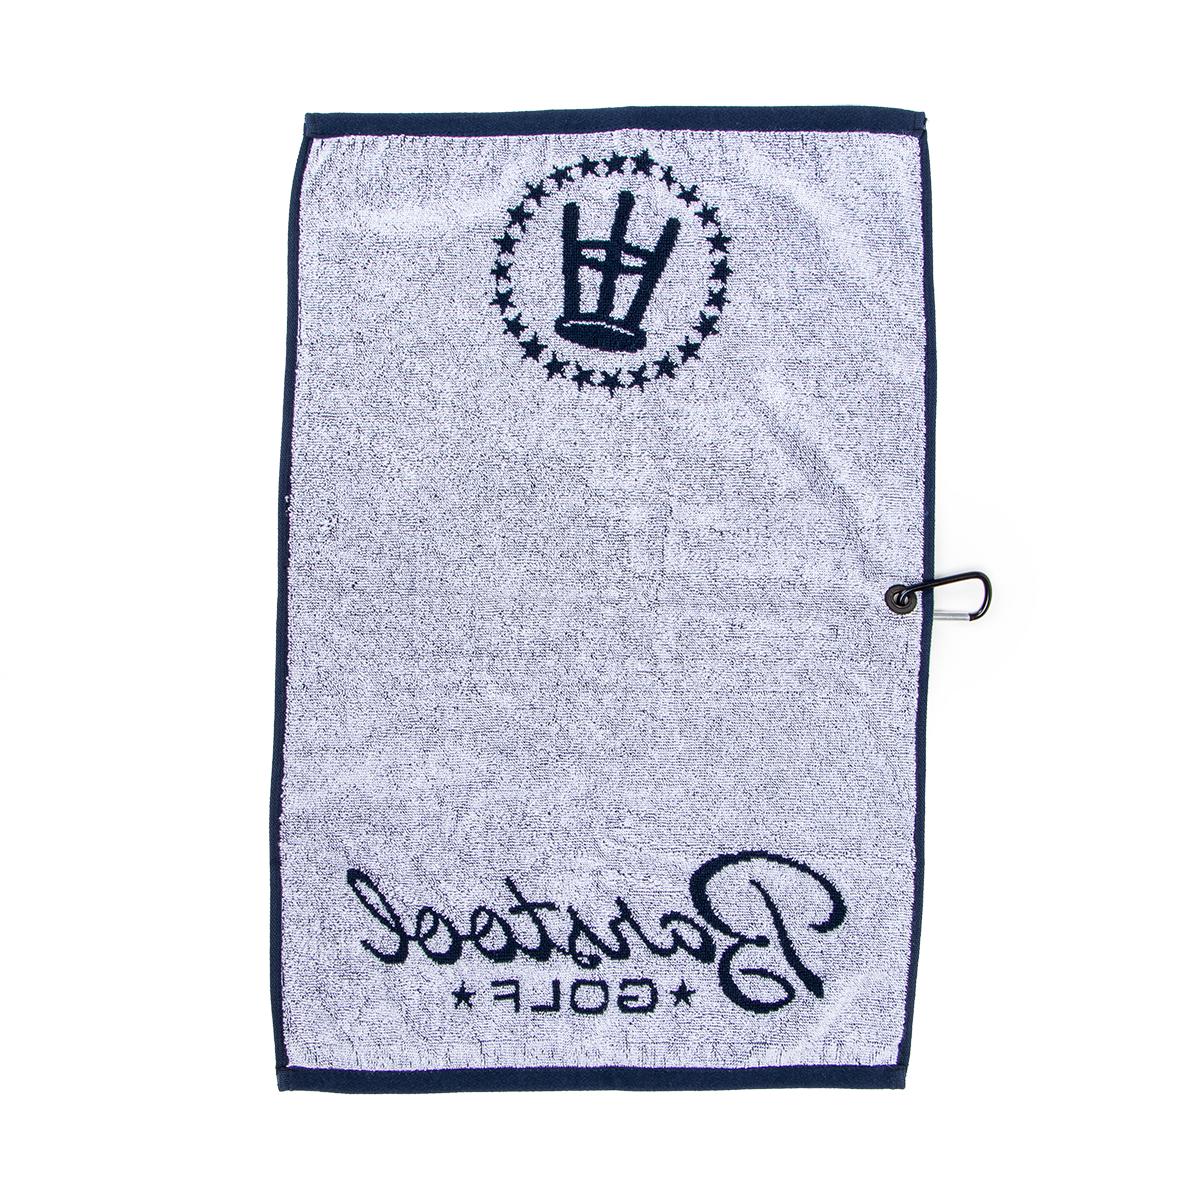 Barstool Golf Golf Towel-Golf Accessories-Fore Play-Navy-One Size-Barstool Sports